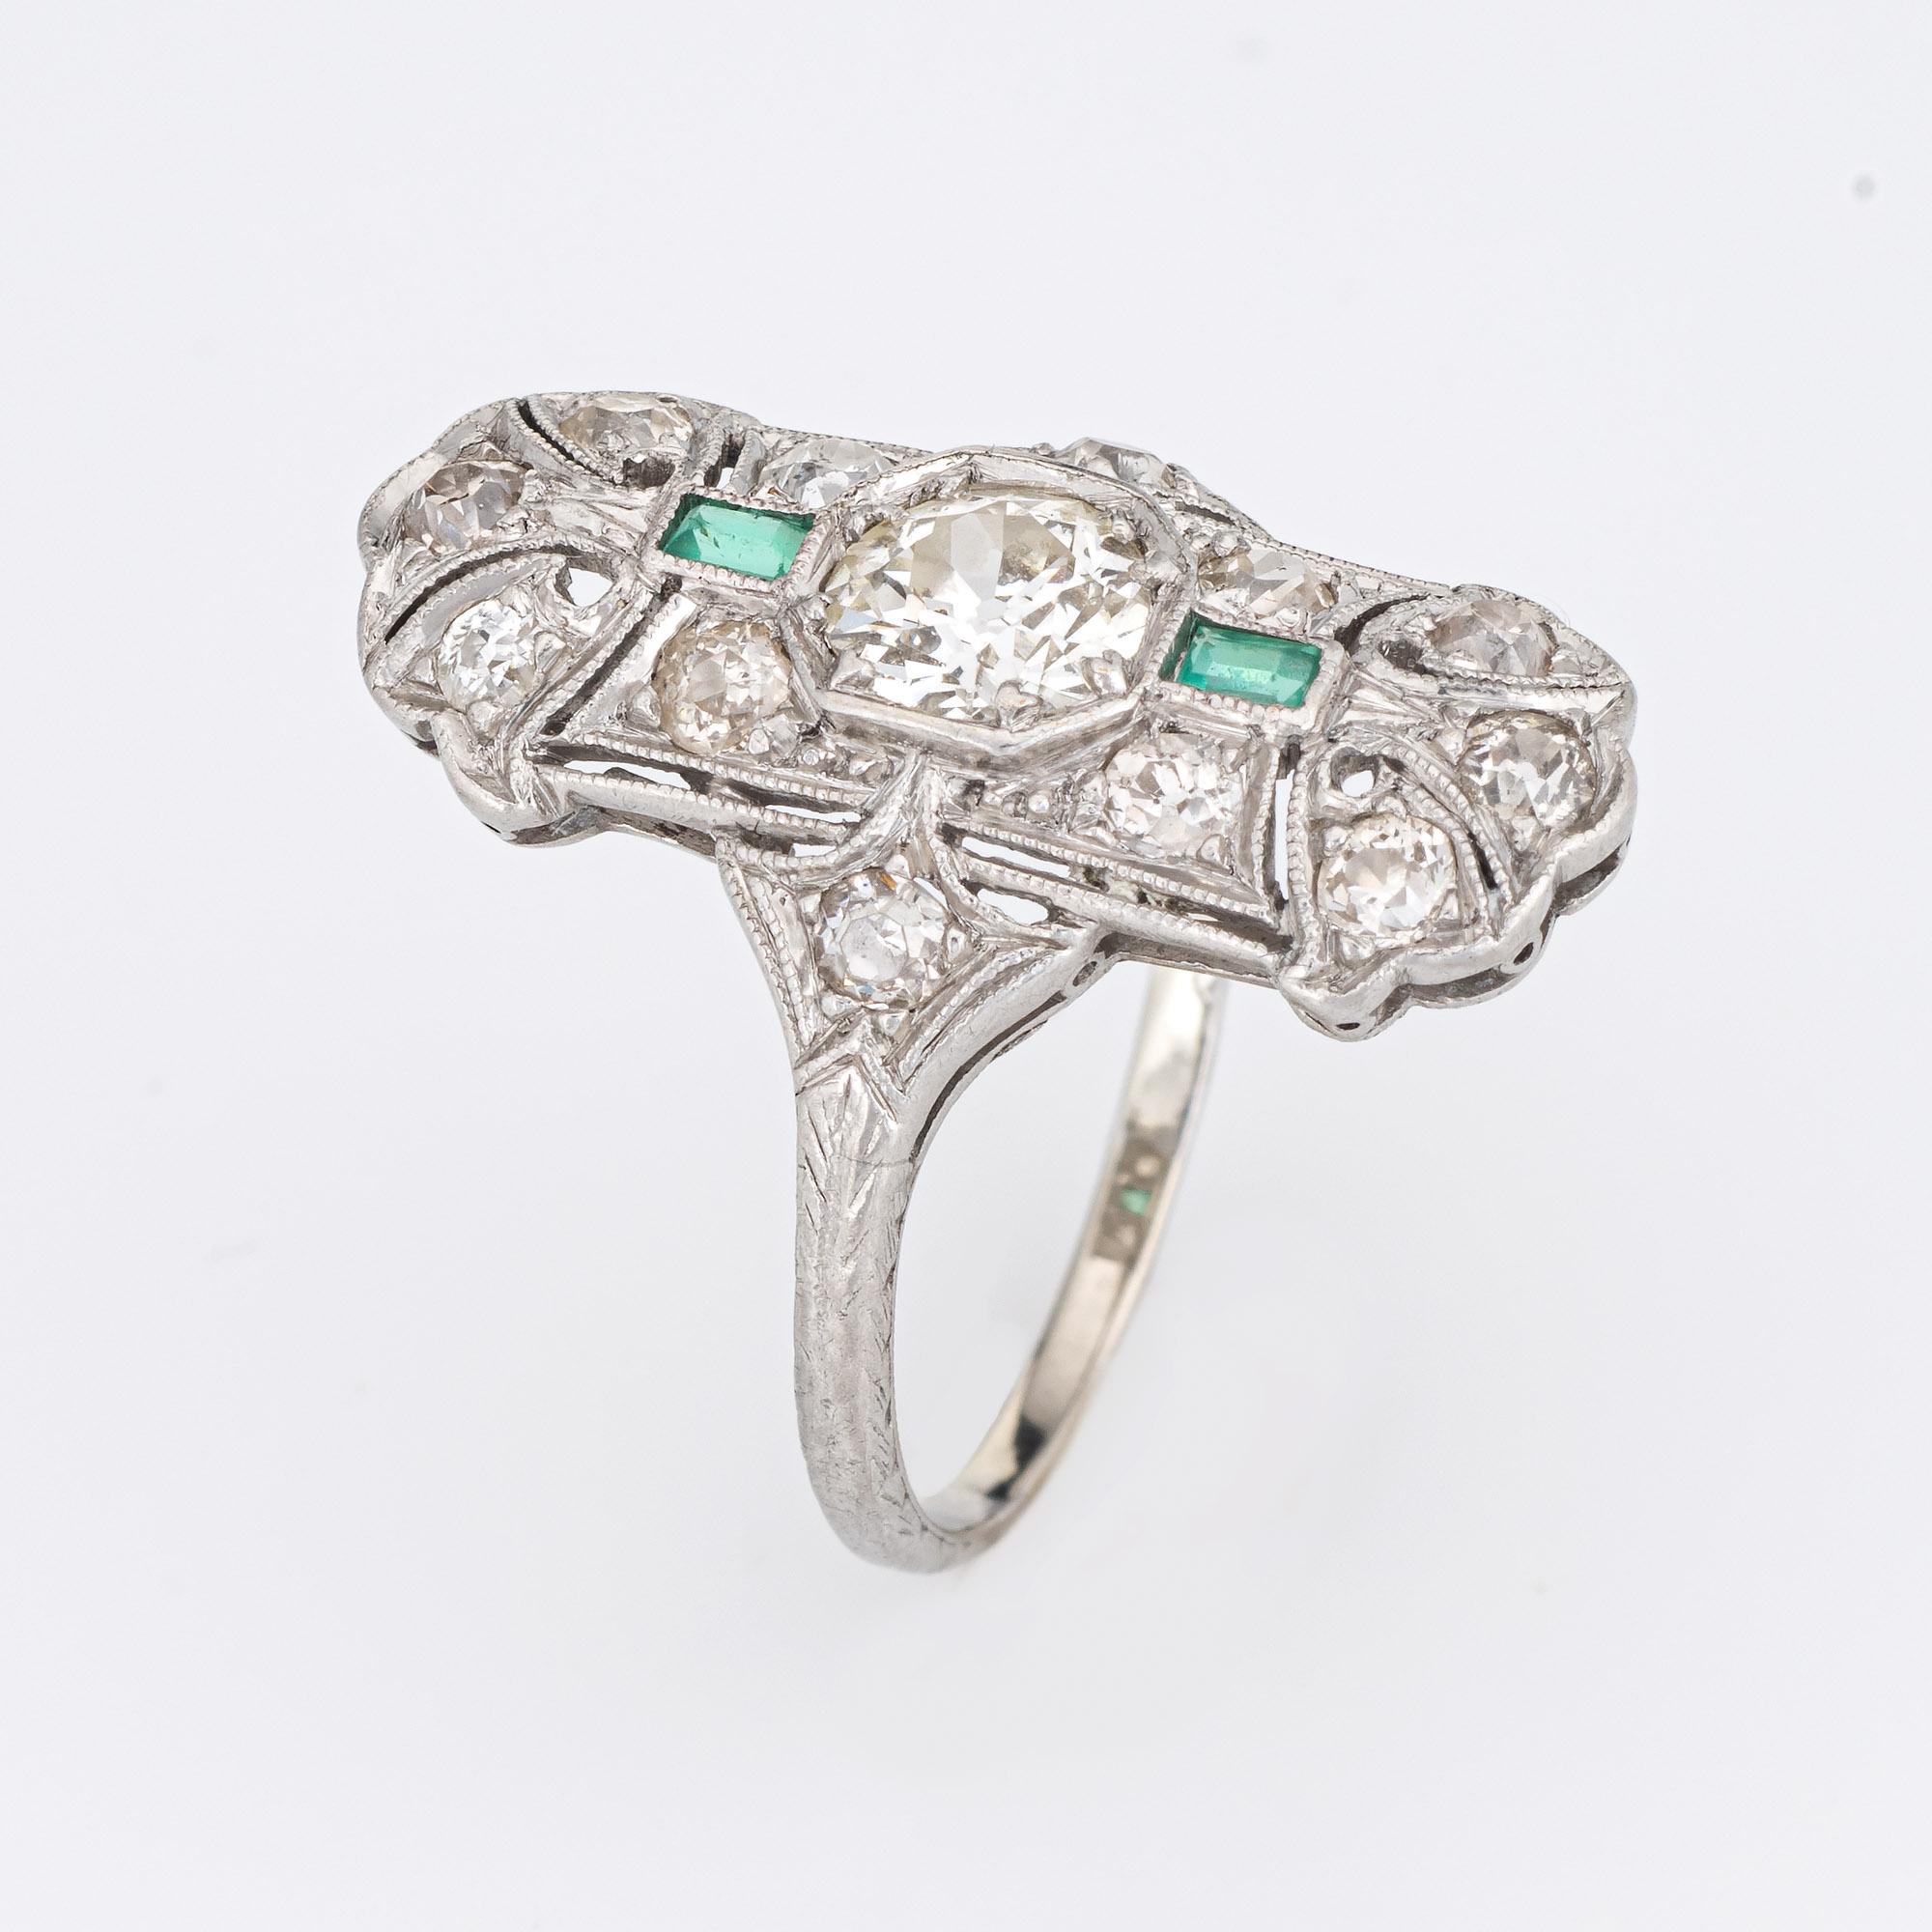 Finely detailed vintage Art Deco emerald & diamond ring (circa 1920s to 1930s) crafted in platinum. 

Center set old European cut diamond is estimated at .90 carats, accented with 12 estimated 0.05 carat old mine cut diamonds. The total diamond